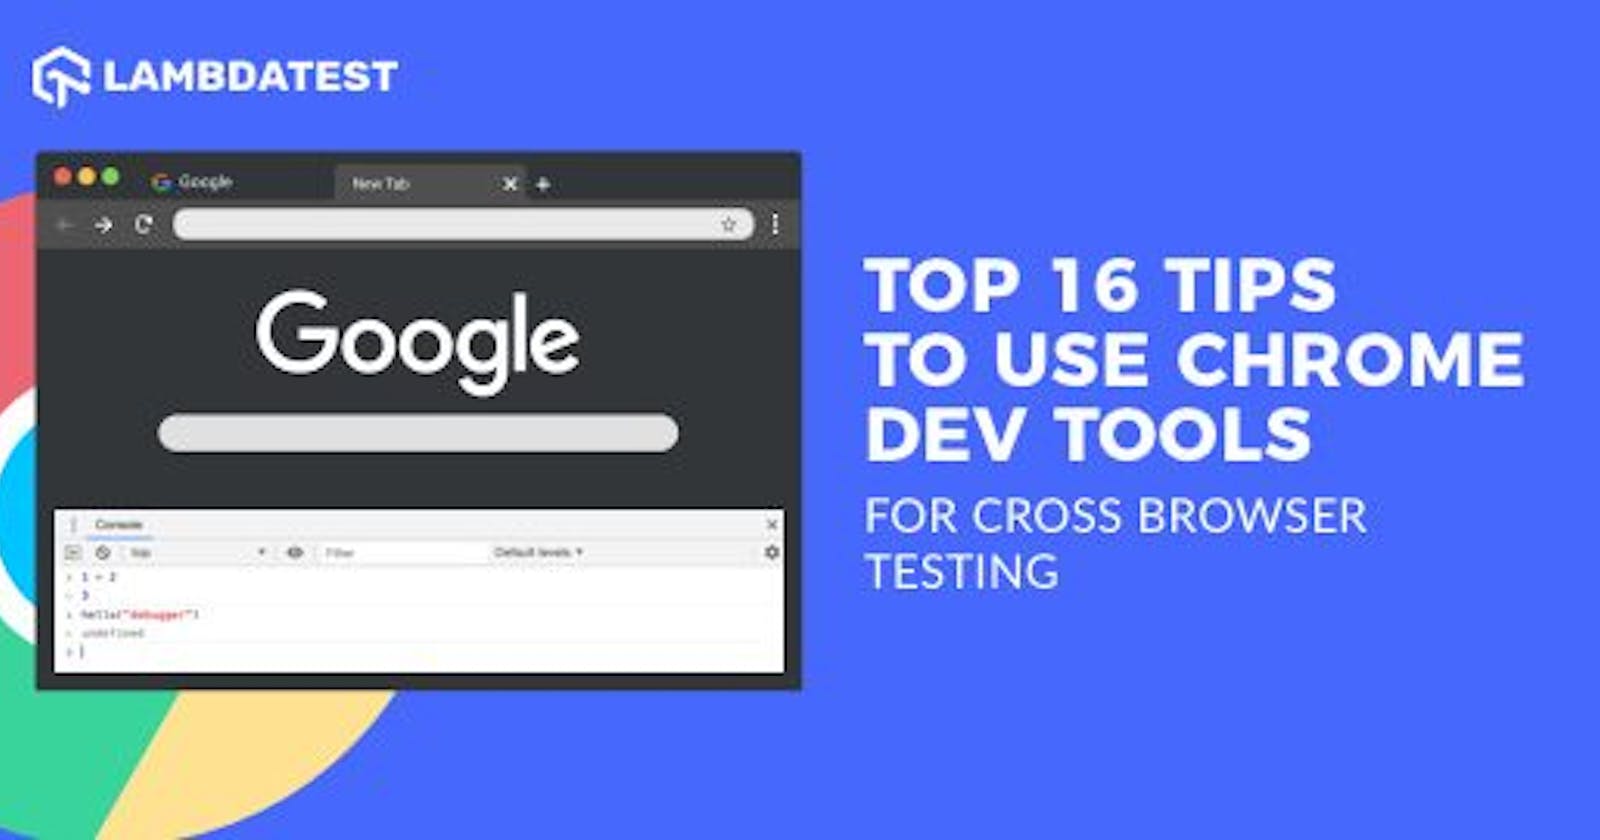 Top 16 Tips To Use Chrome Dev Tools For Cross Browser Testing